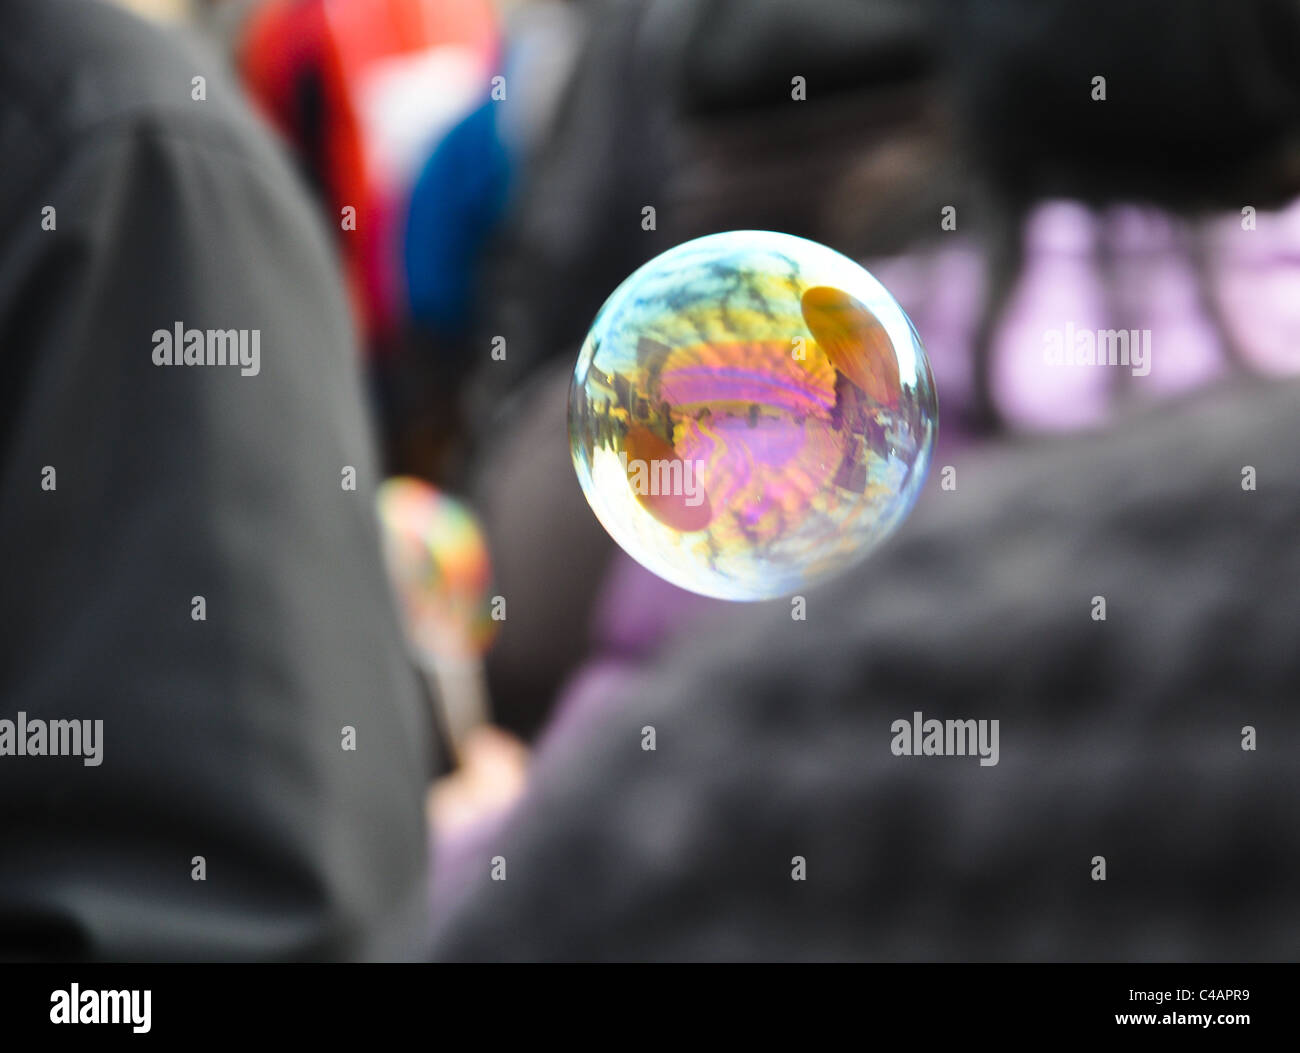 a lone fragile soap bubble is floating through a crowd Stock Photo